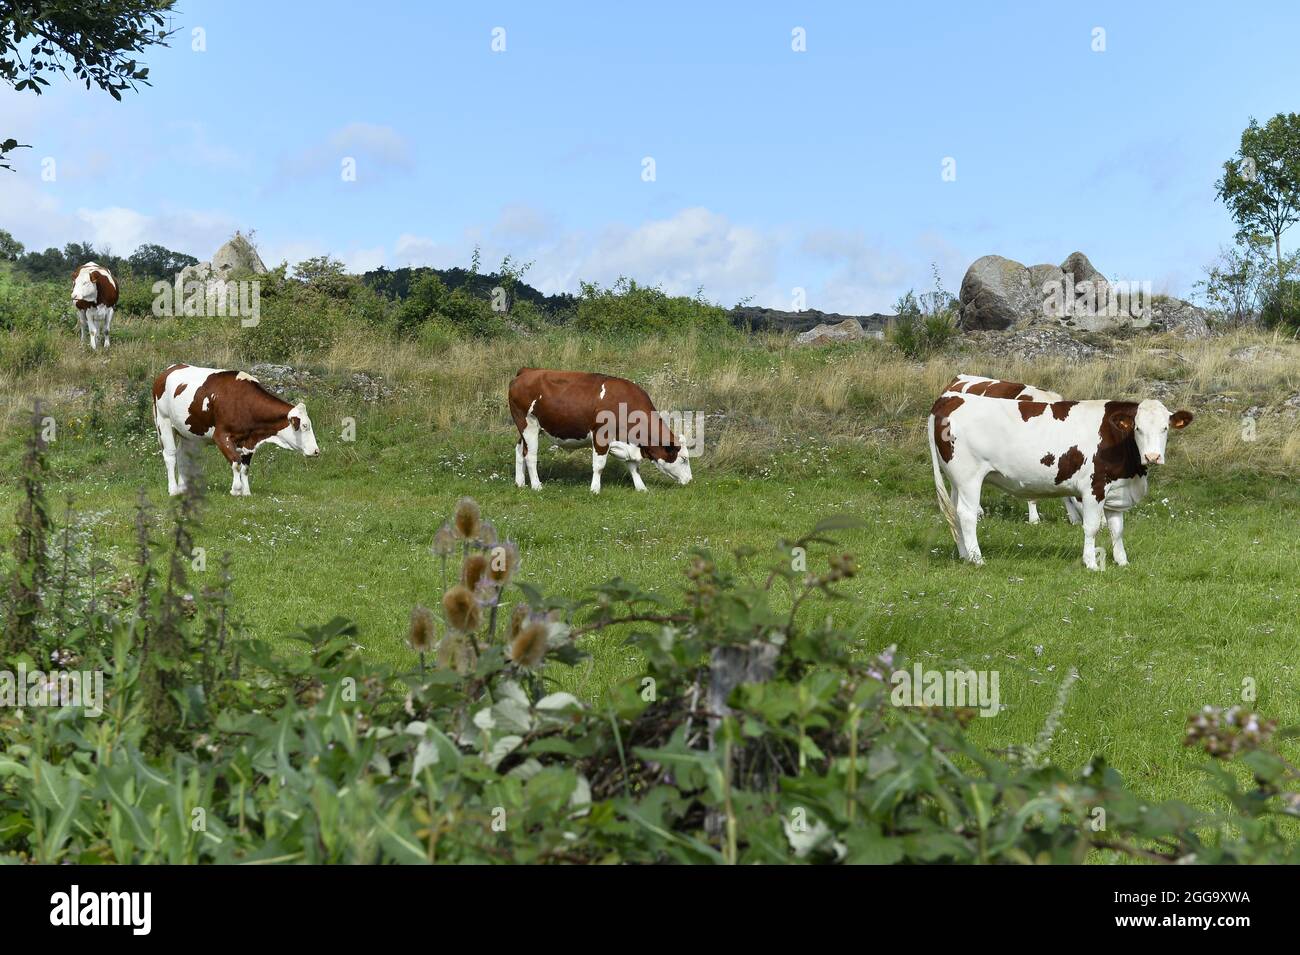 Herd of Cows - Olloix - Auvergne - France Stock Photo